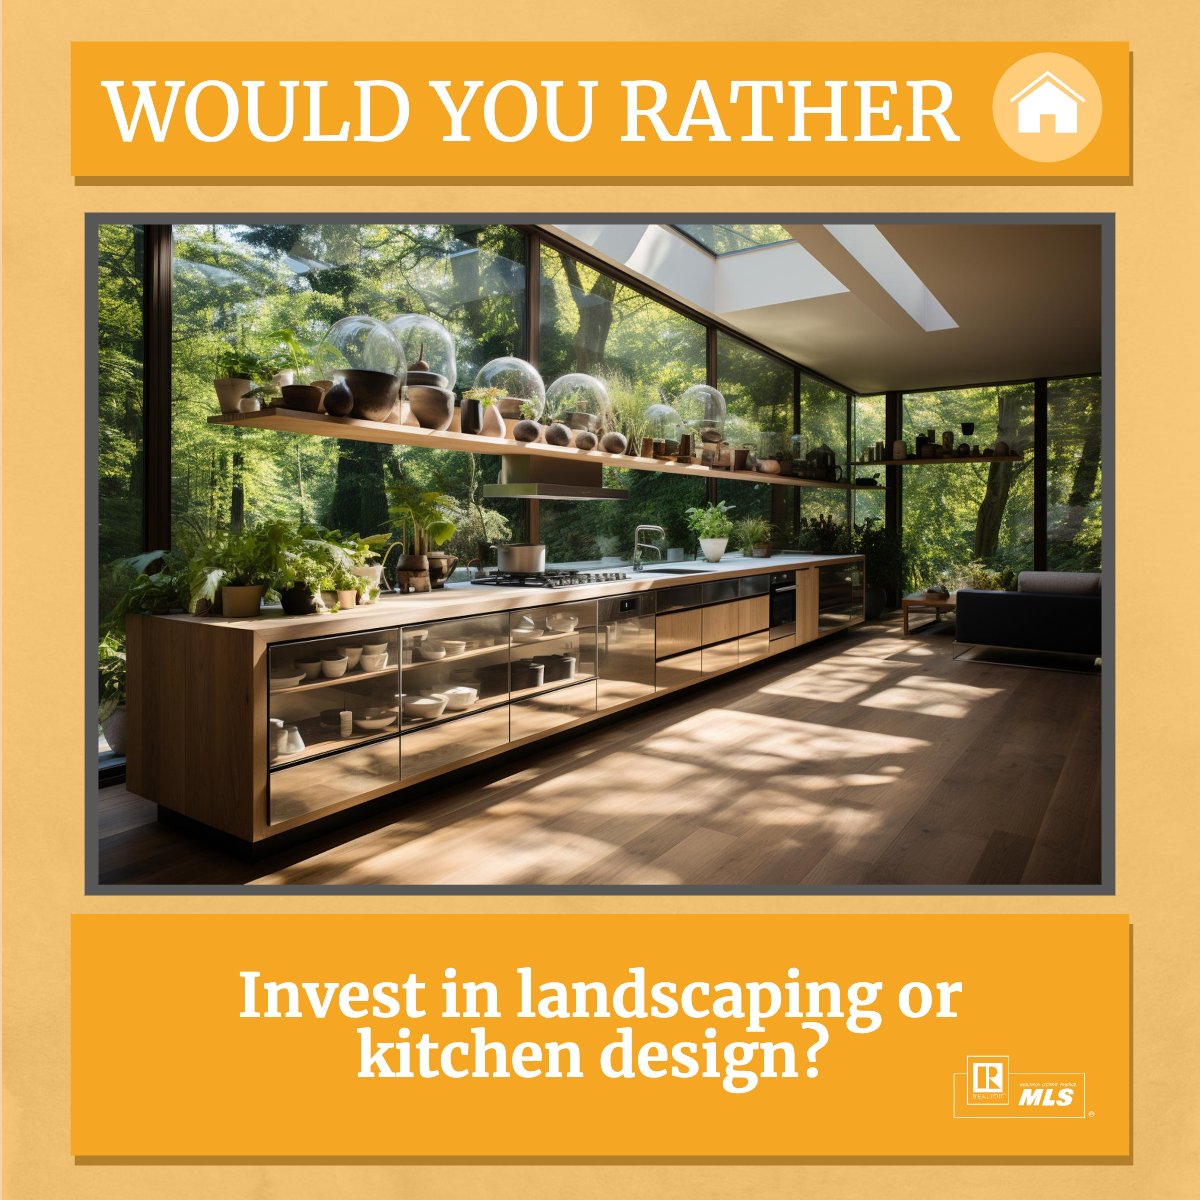 If you had the chance, what would you choose?

A. The perfect outdoor space or B. The ultimate culinary setting for your creations.

Share your thoughts below!

#wouldyourather #wouldyouratherquestions
 #Whoyouworkwithmatters #NolaRealEstate #LovewhoIworkwith #REALTOR